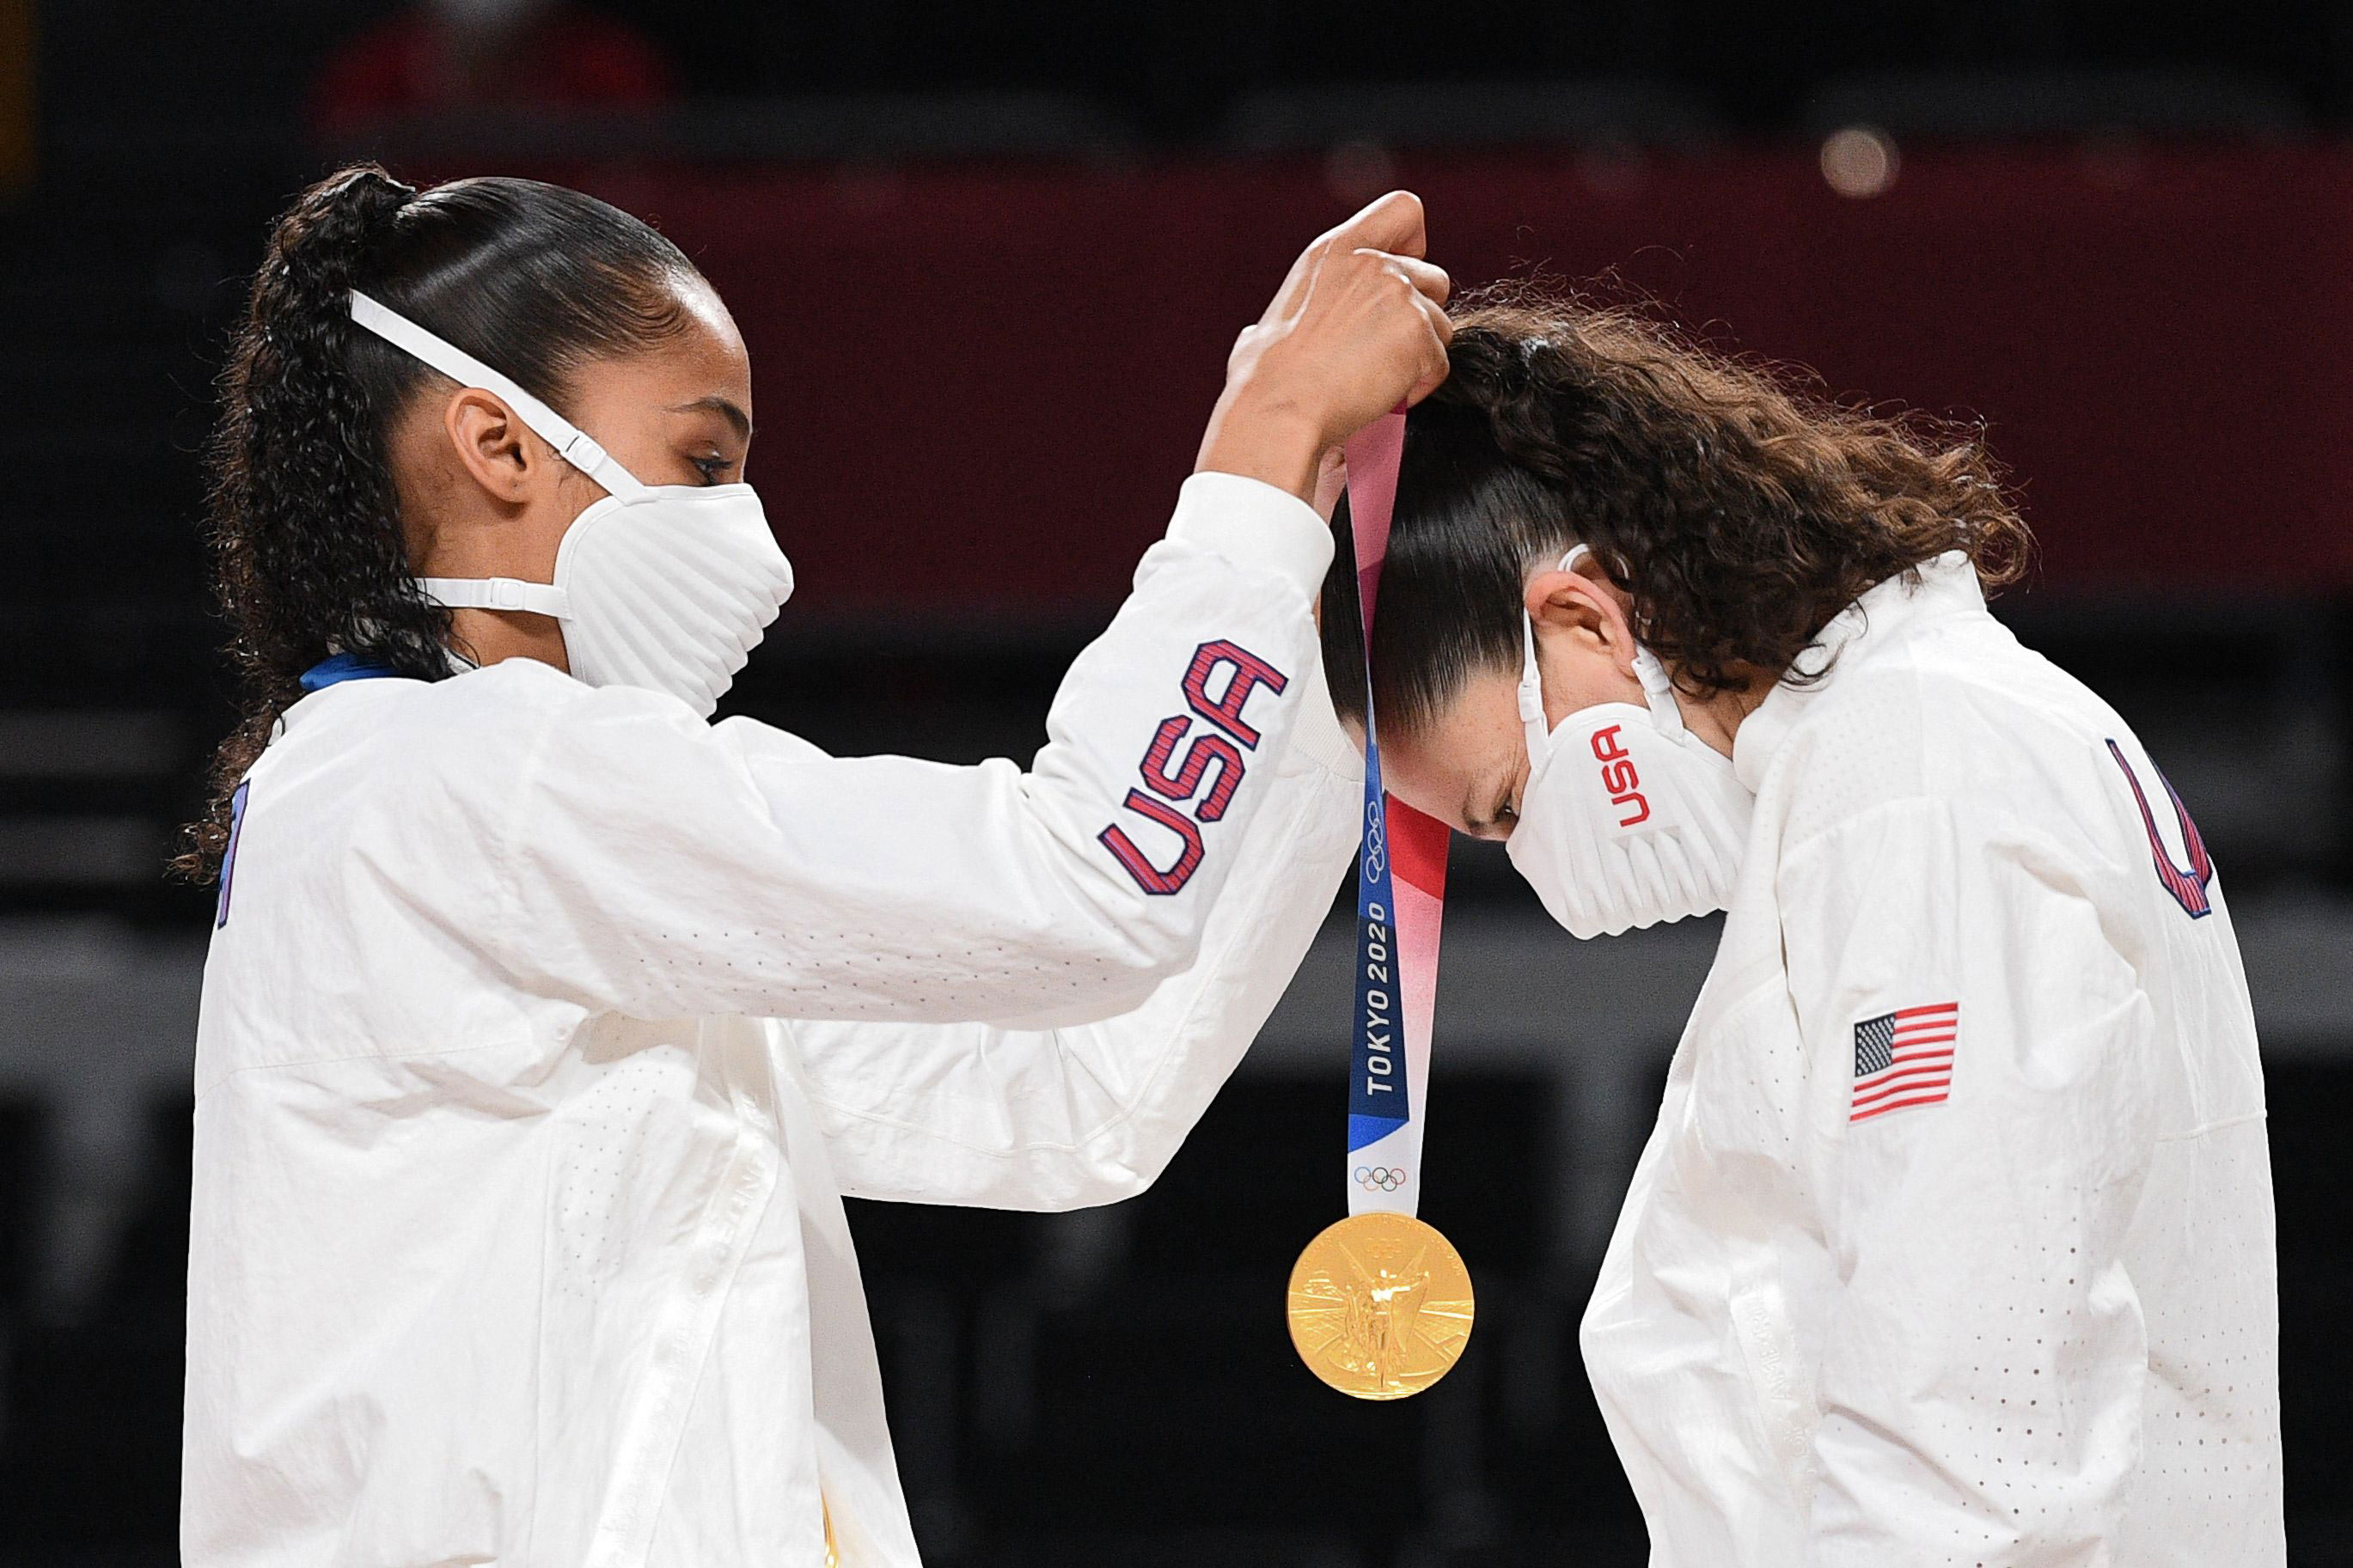 team-usa-finishes-top-of-the-medal-table-for-third-consecutive-olympic-games